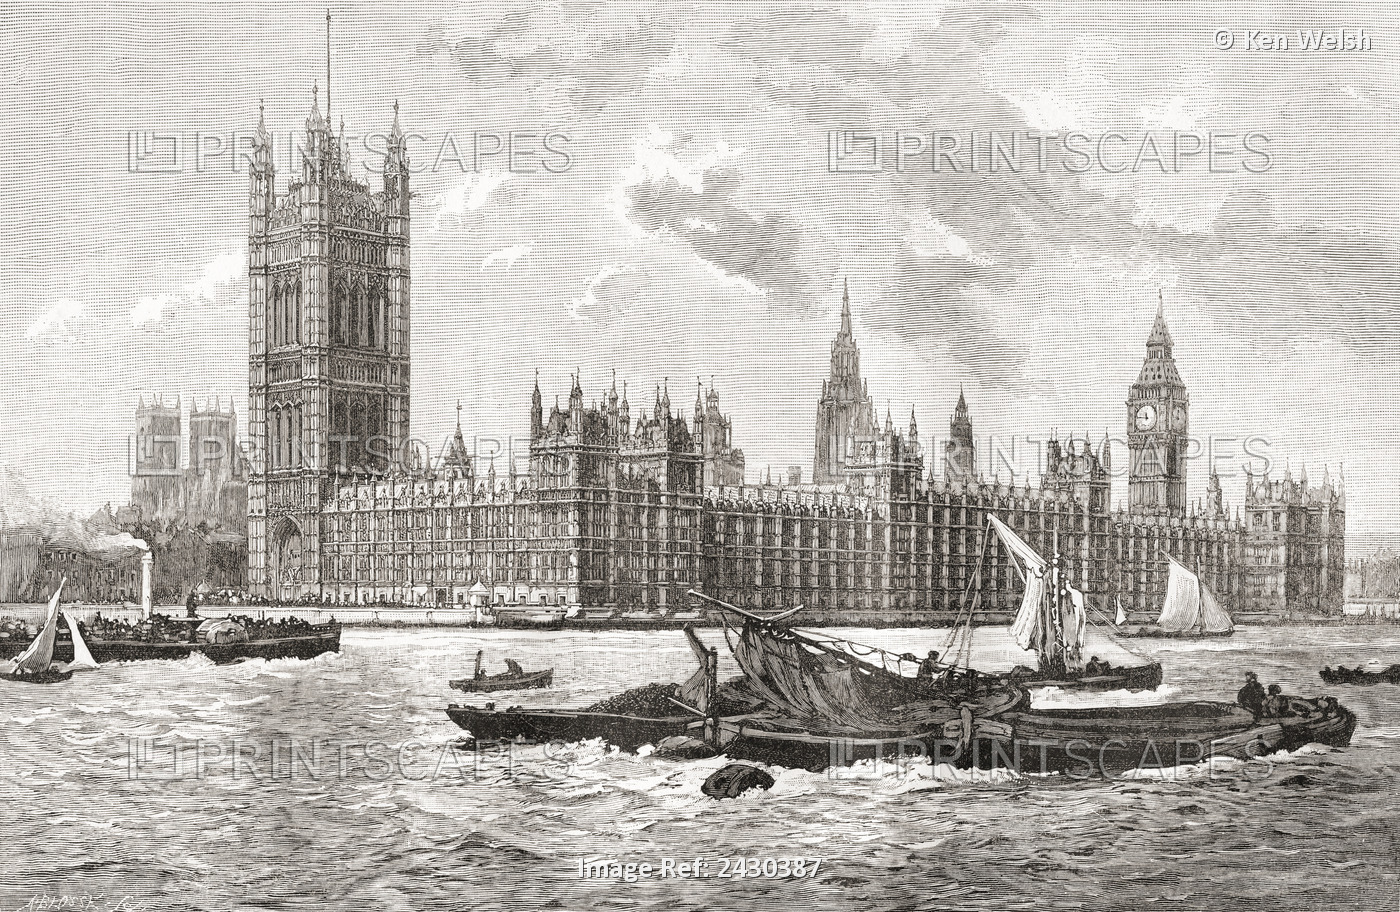 The Houses Of Parliament, City Of Westminster, London, England In The 19th ...